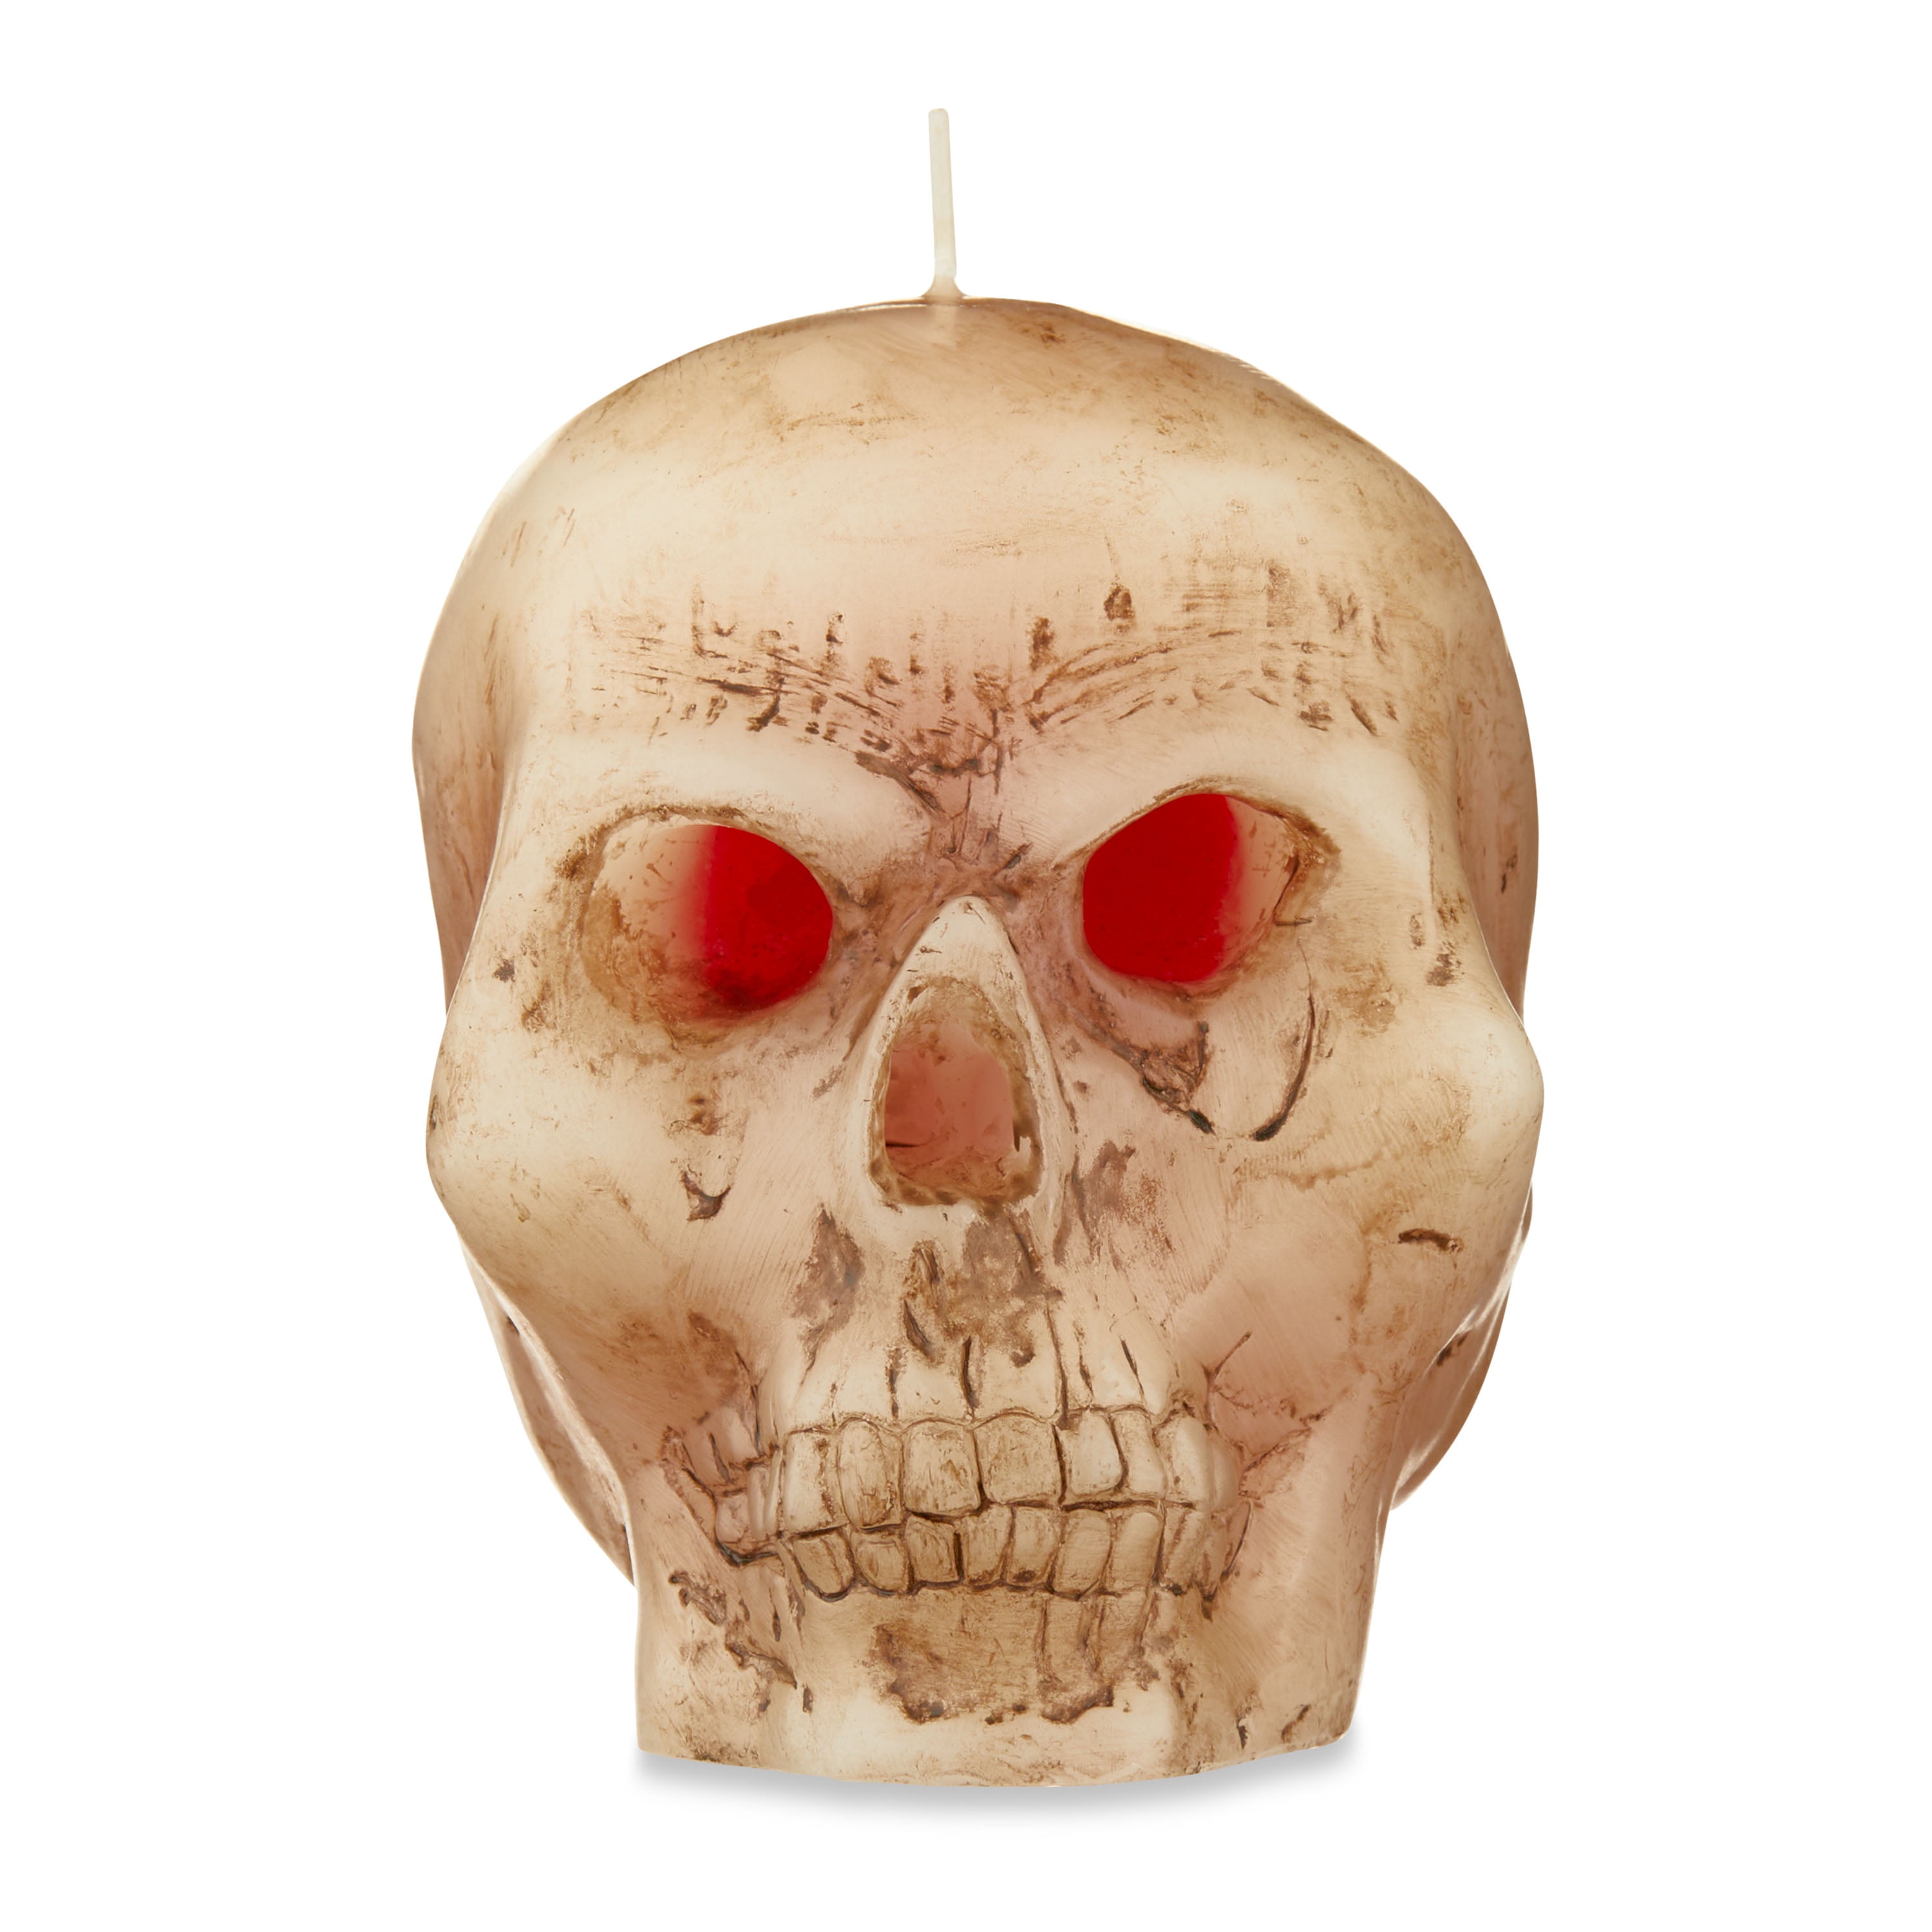 Bleeding Red Skull Candle - OlympiaCrafts